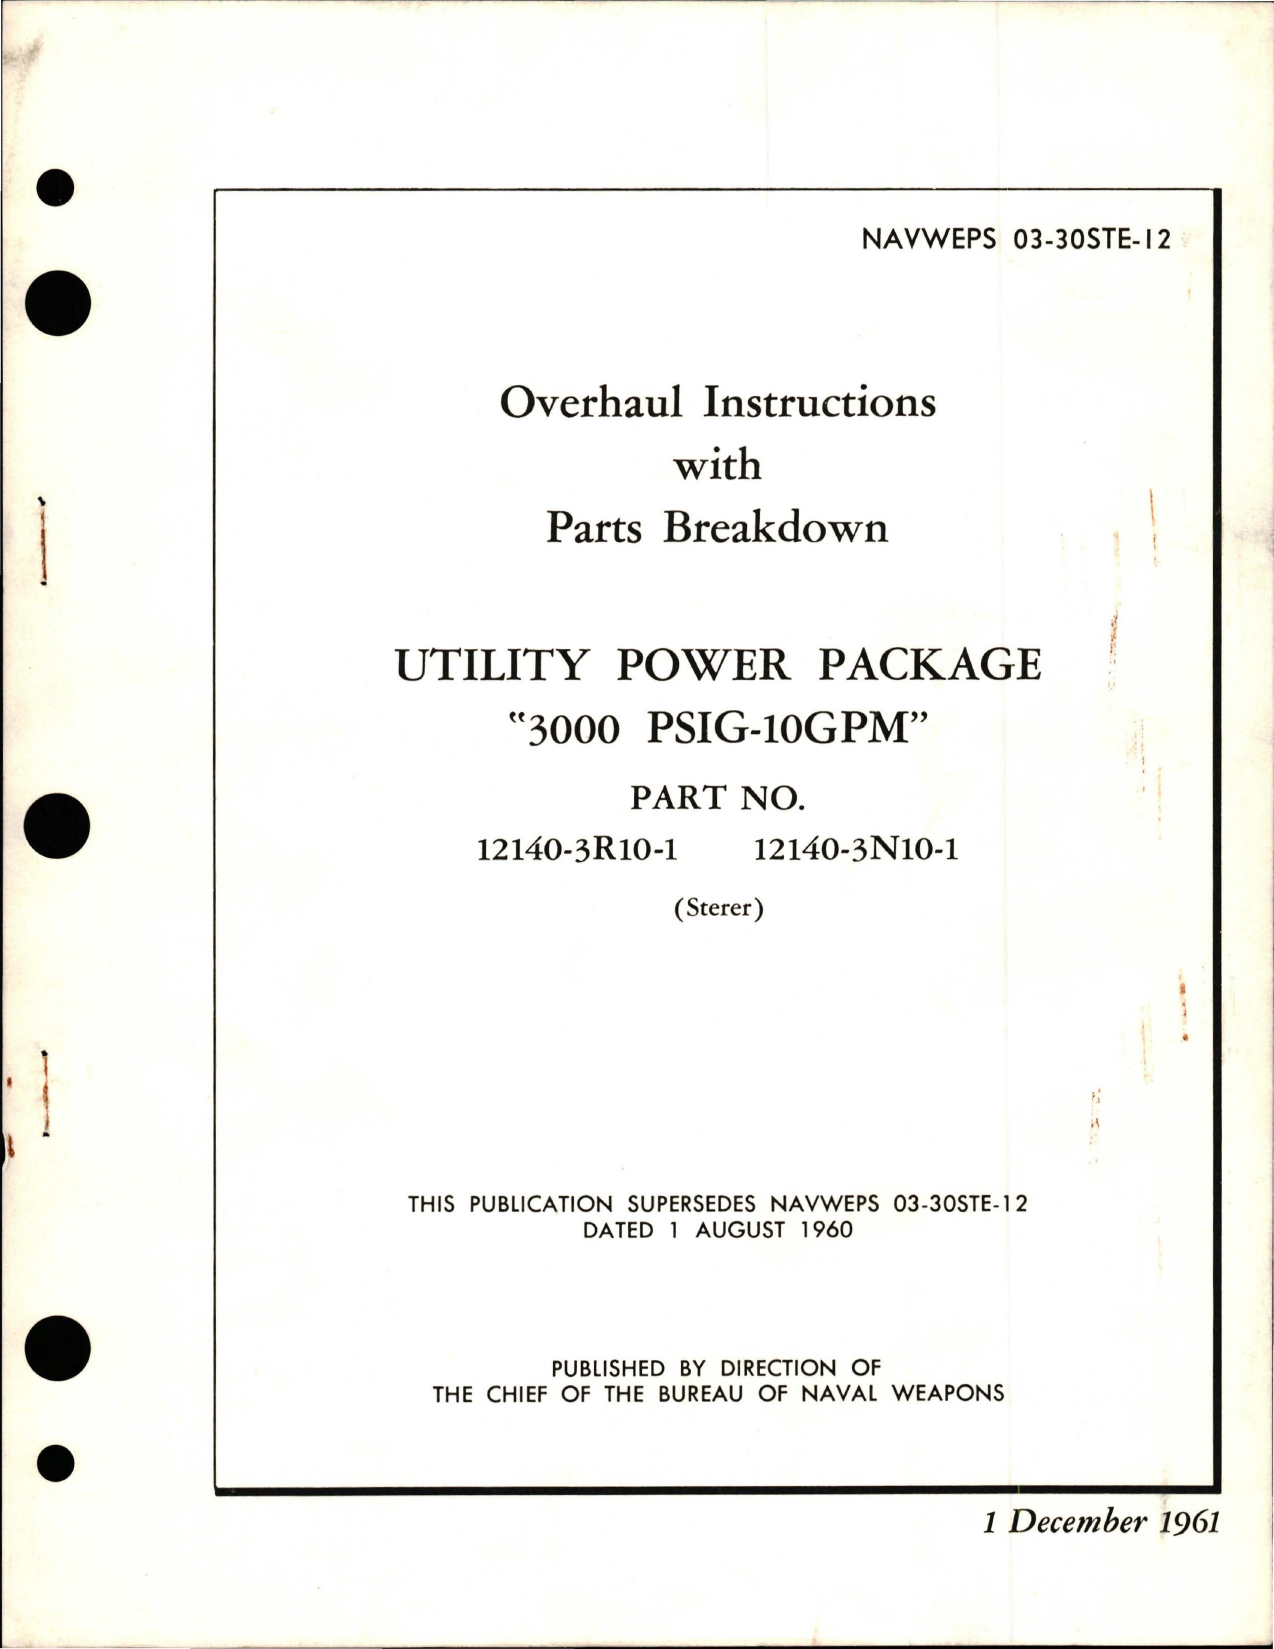 Sample page 1 from AirCorps Library document: Overhaul Instructions with Parts Breakdown for Utility Power Package - 3000 PSIG-10GPM - Part 12140-3R10-1 and 12140-3N10-1 